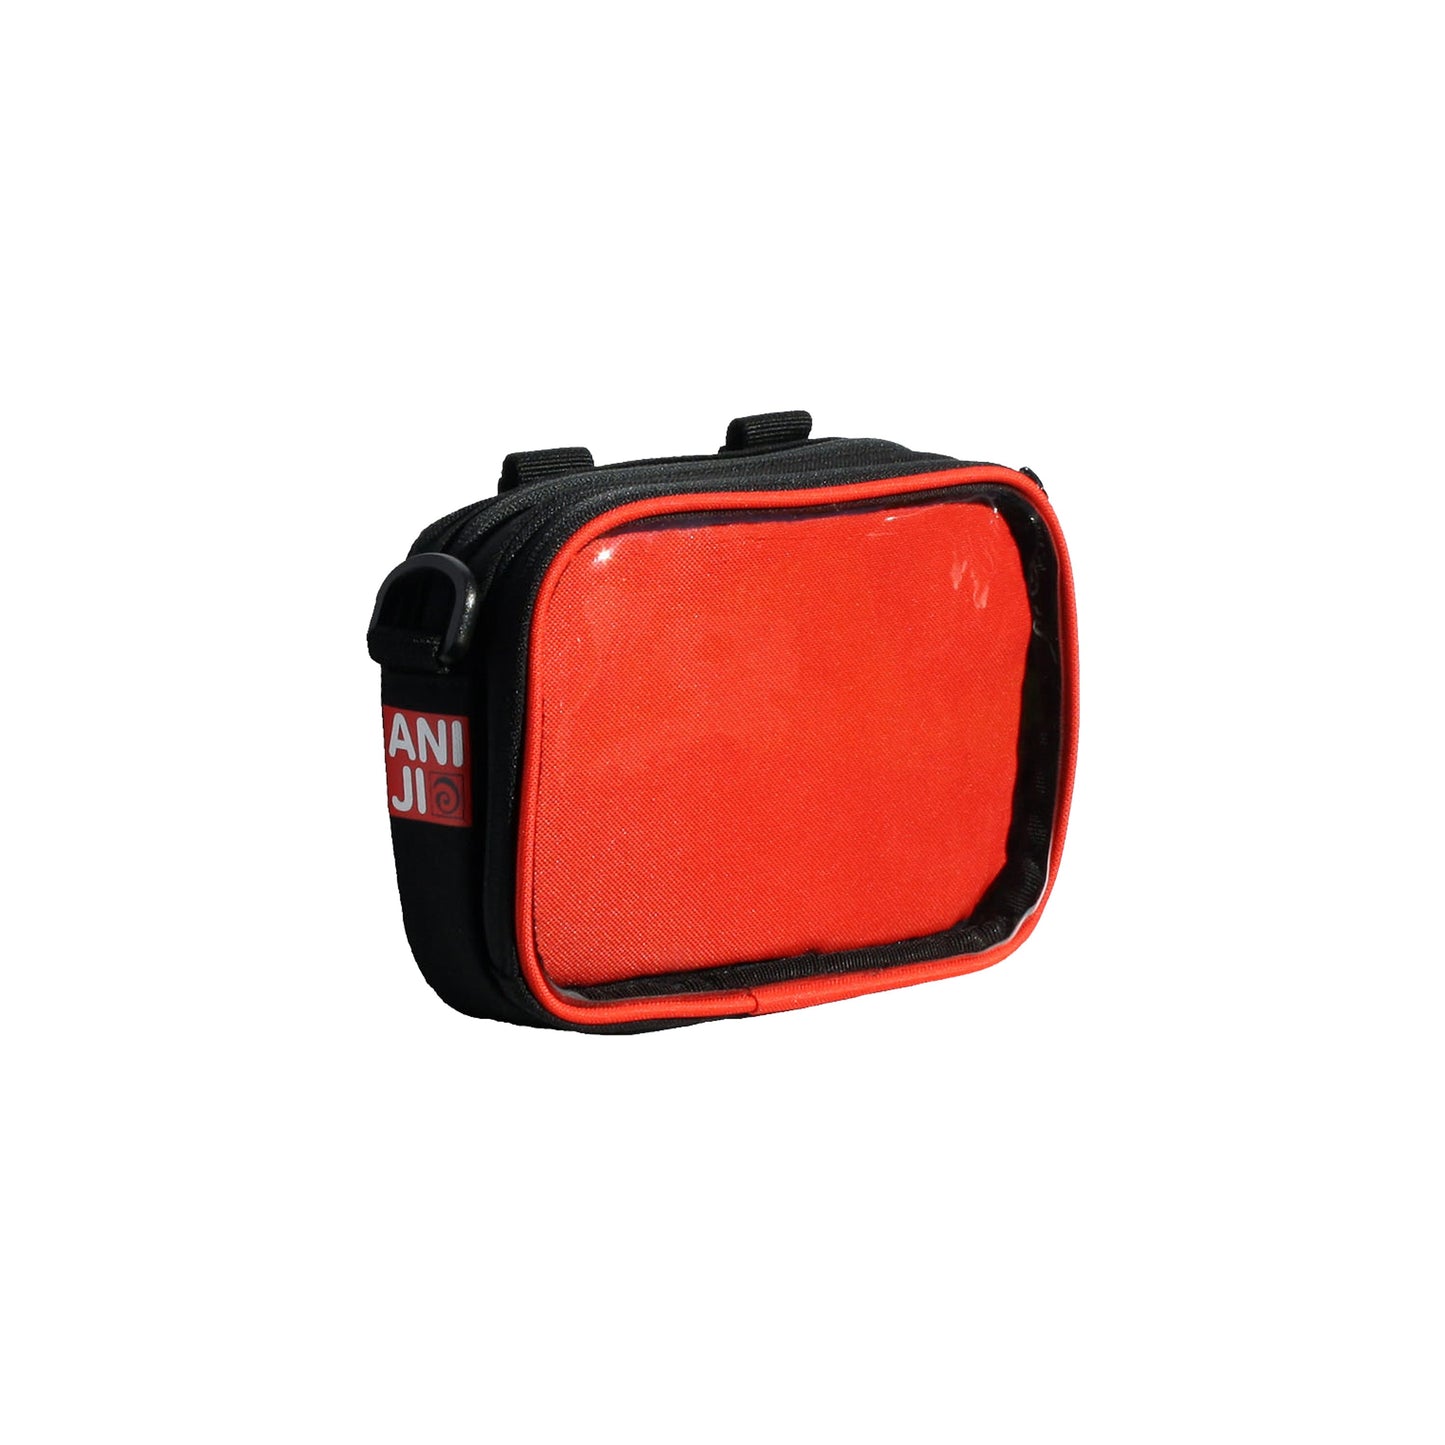 Bery Ita Fanny Pack with Detachable Shoulder Strap (Red)